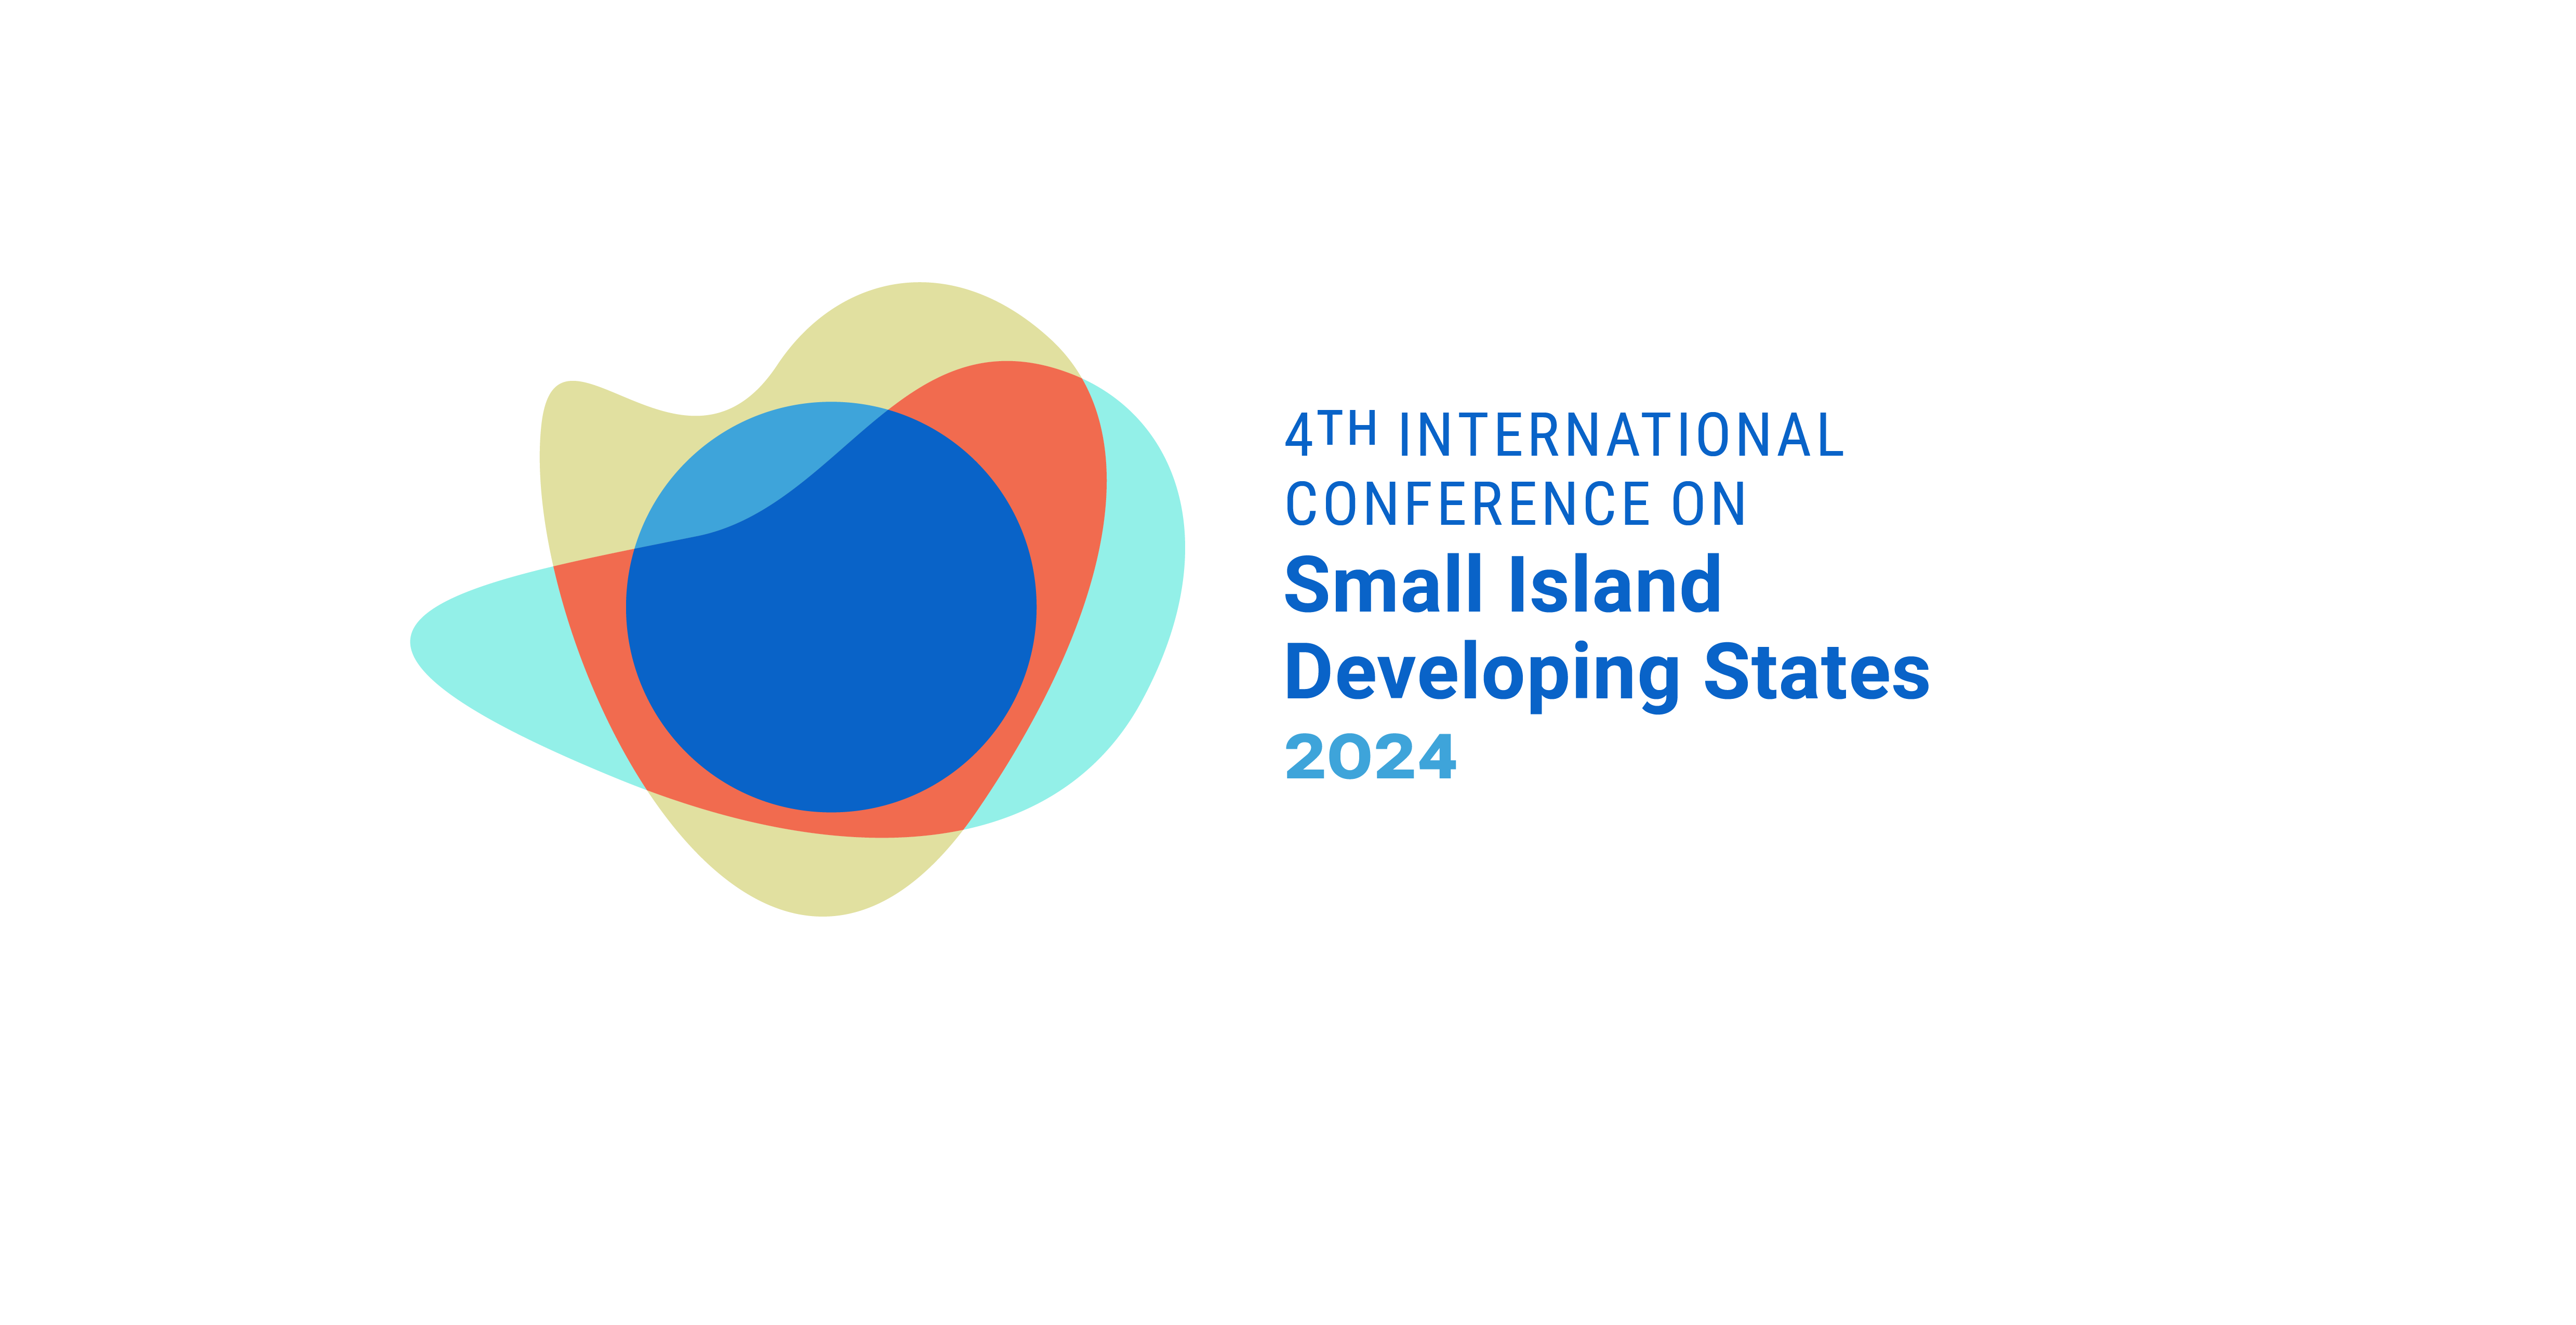 4th International Conference on Small Island Developing States